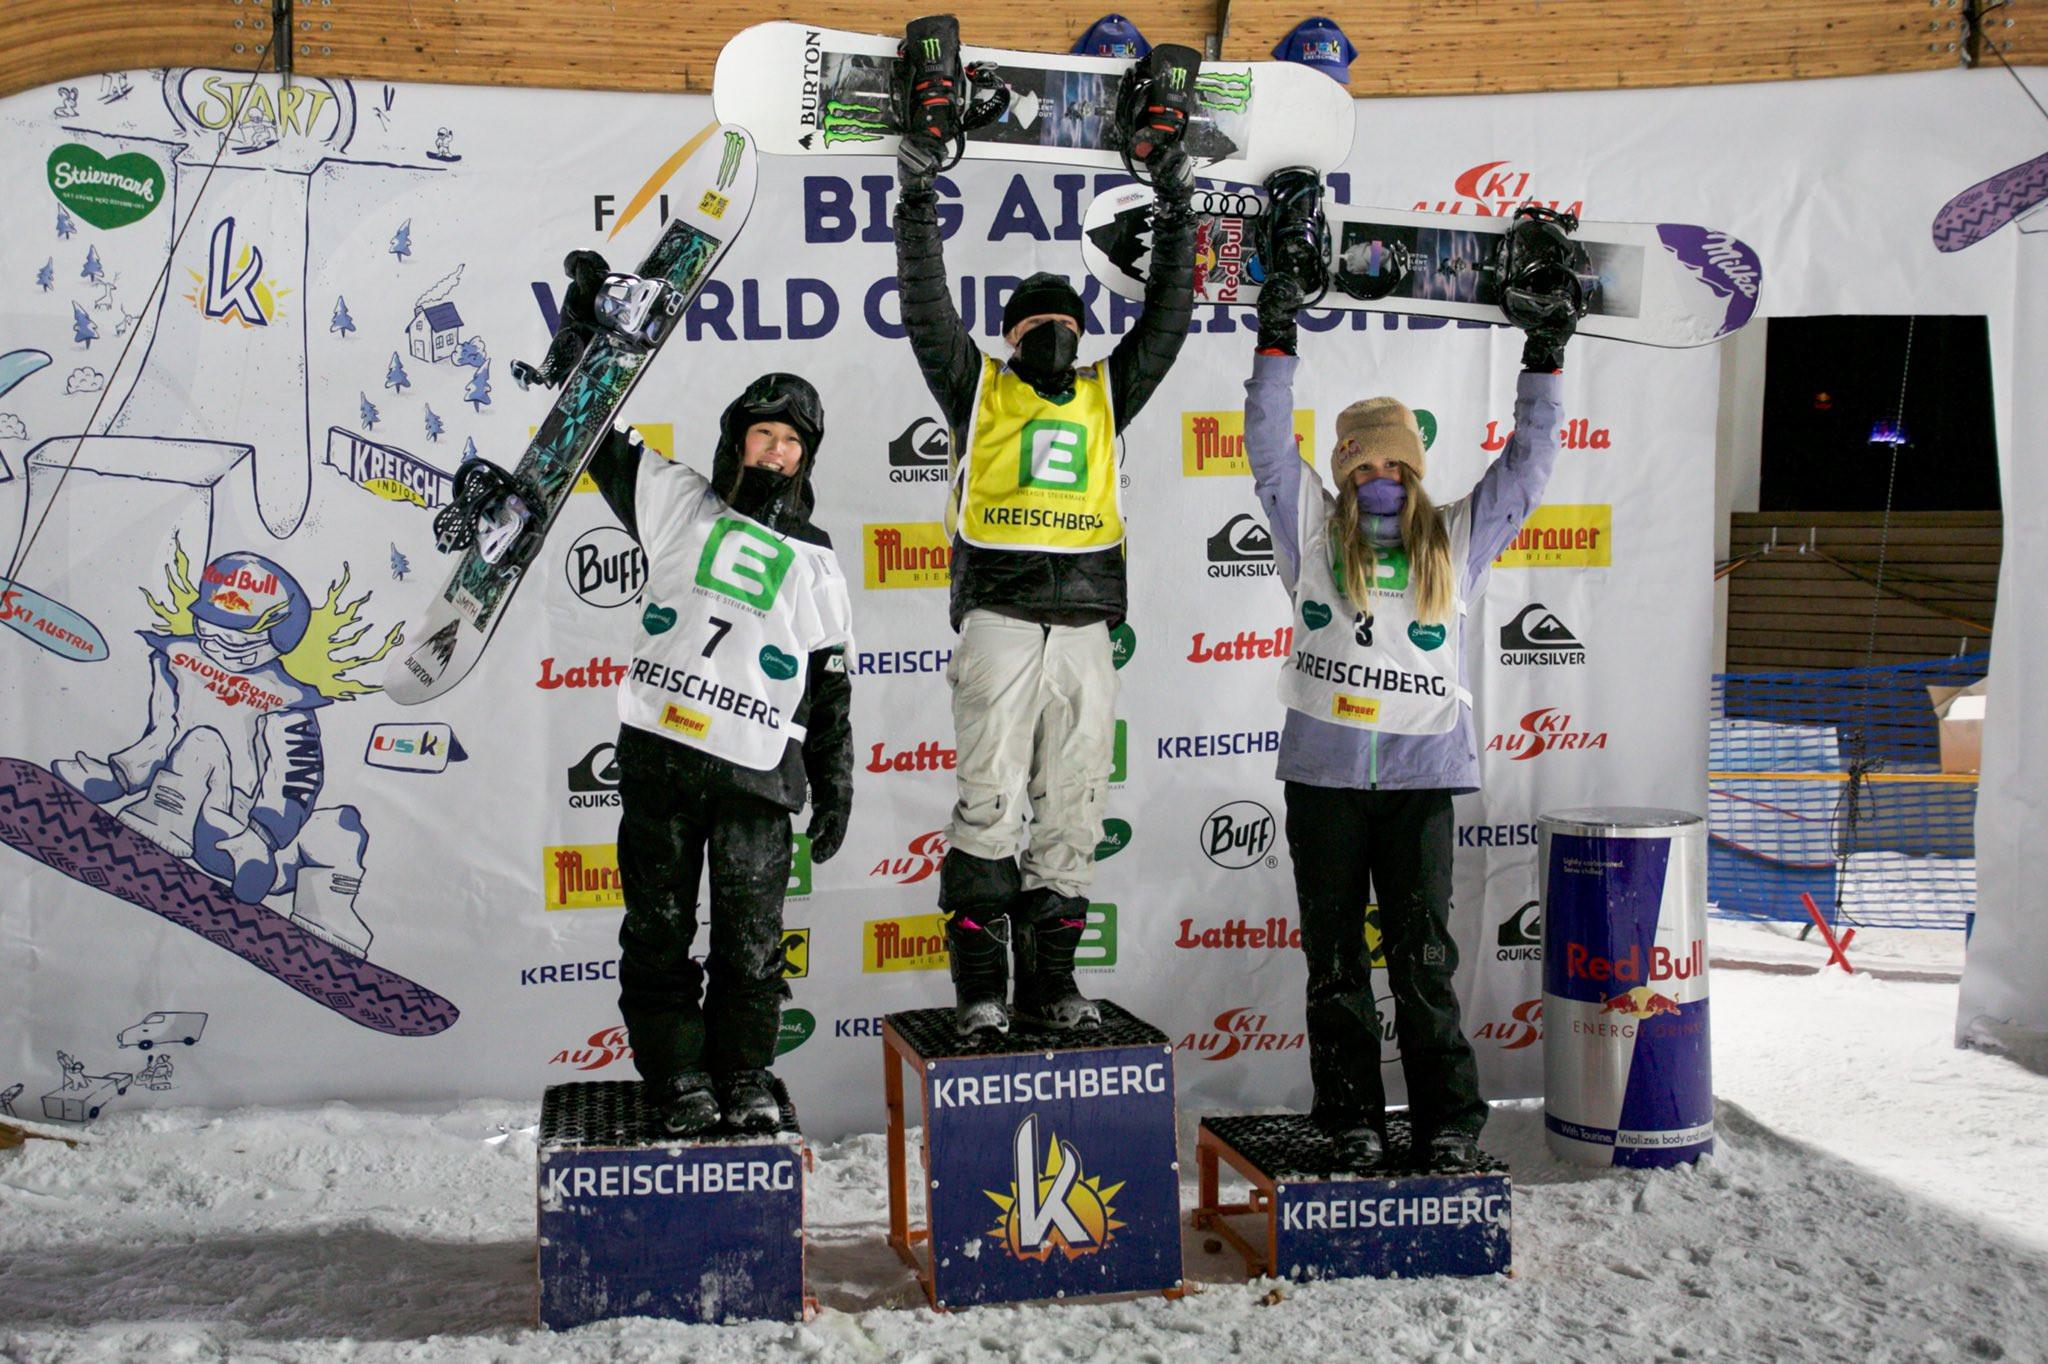 The women's podium for the FIS Snowboard Big Air World Cup in Kreischberg ©FIS